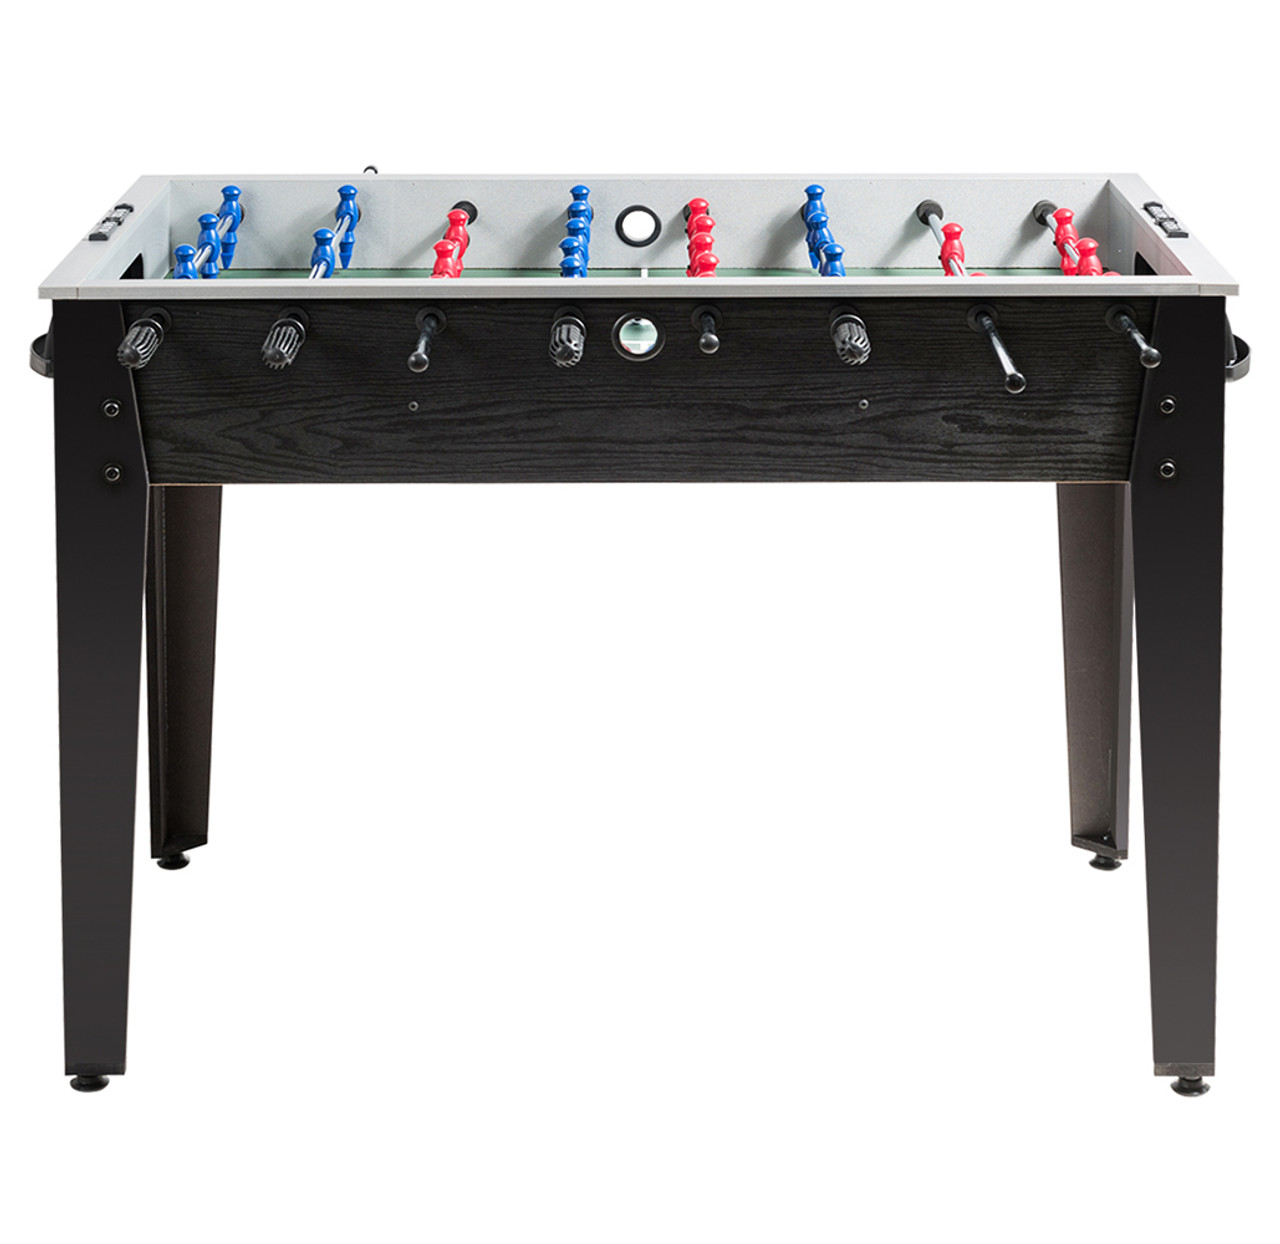 Competition-Sized 48-Inch Wooden Foosball Table product image